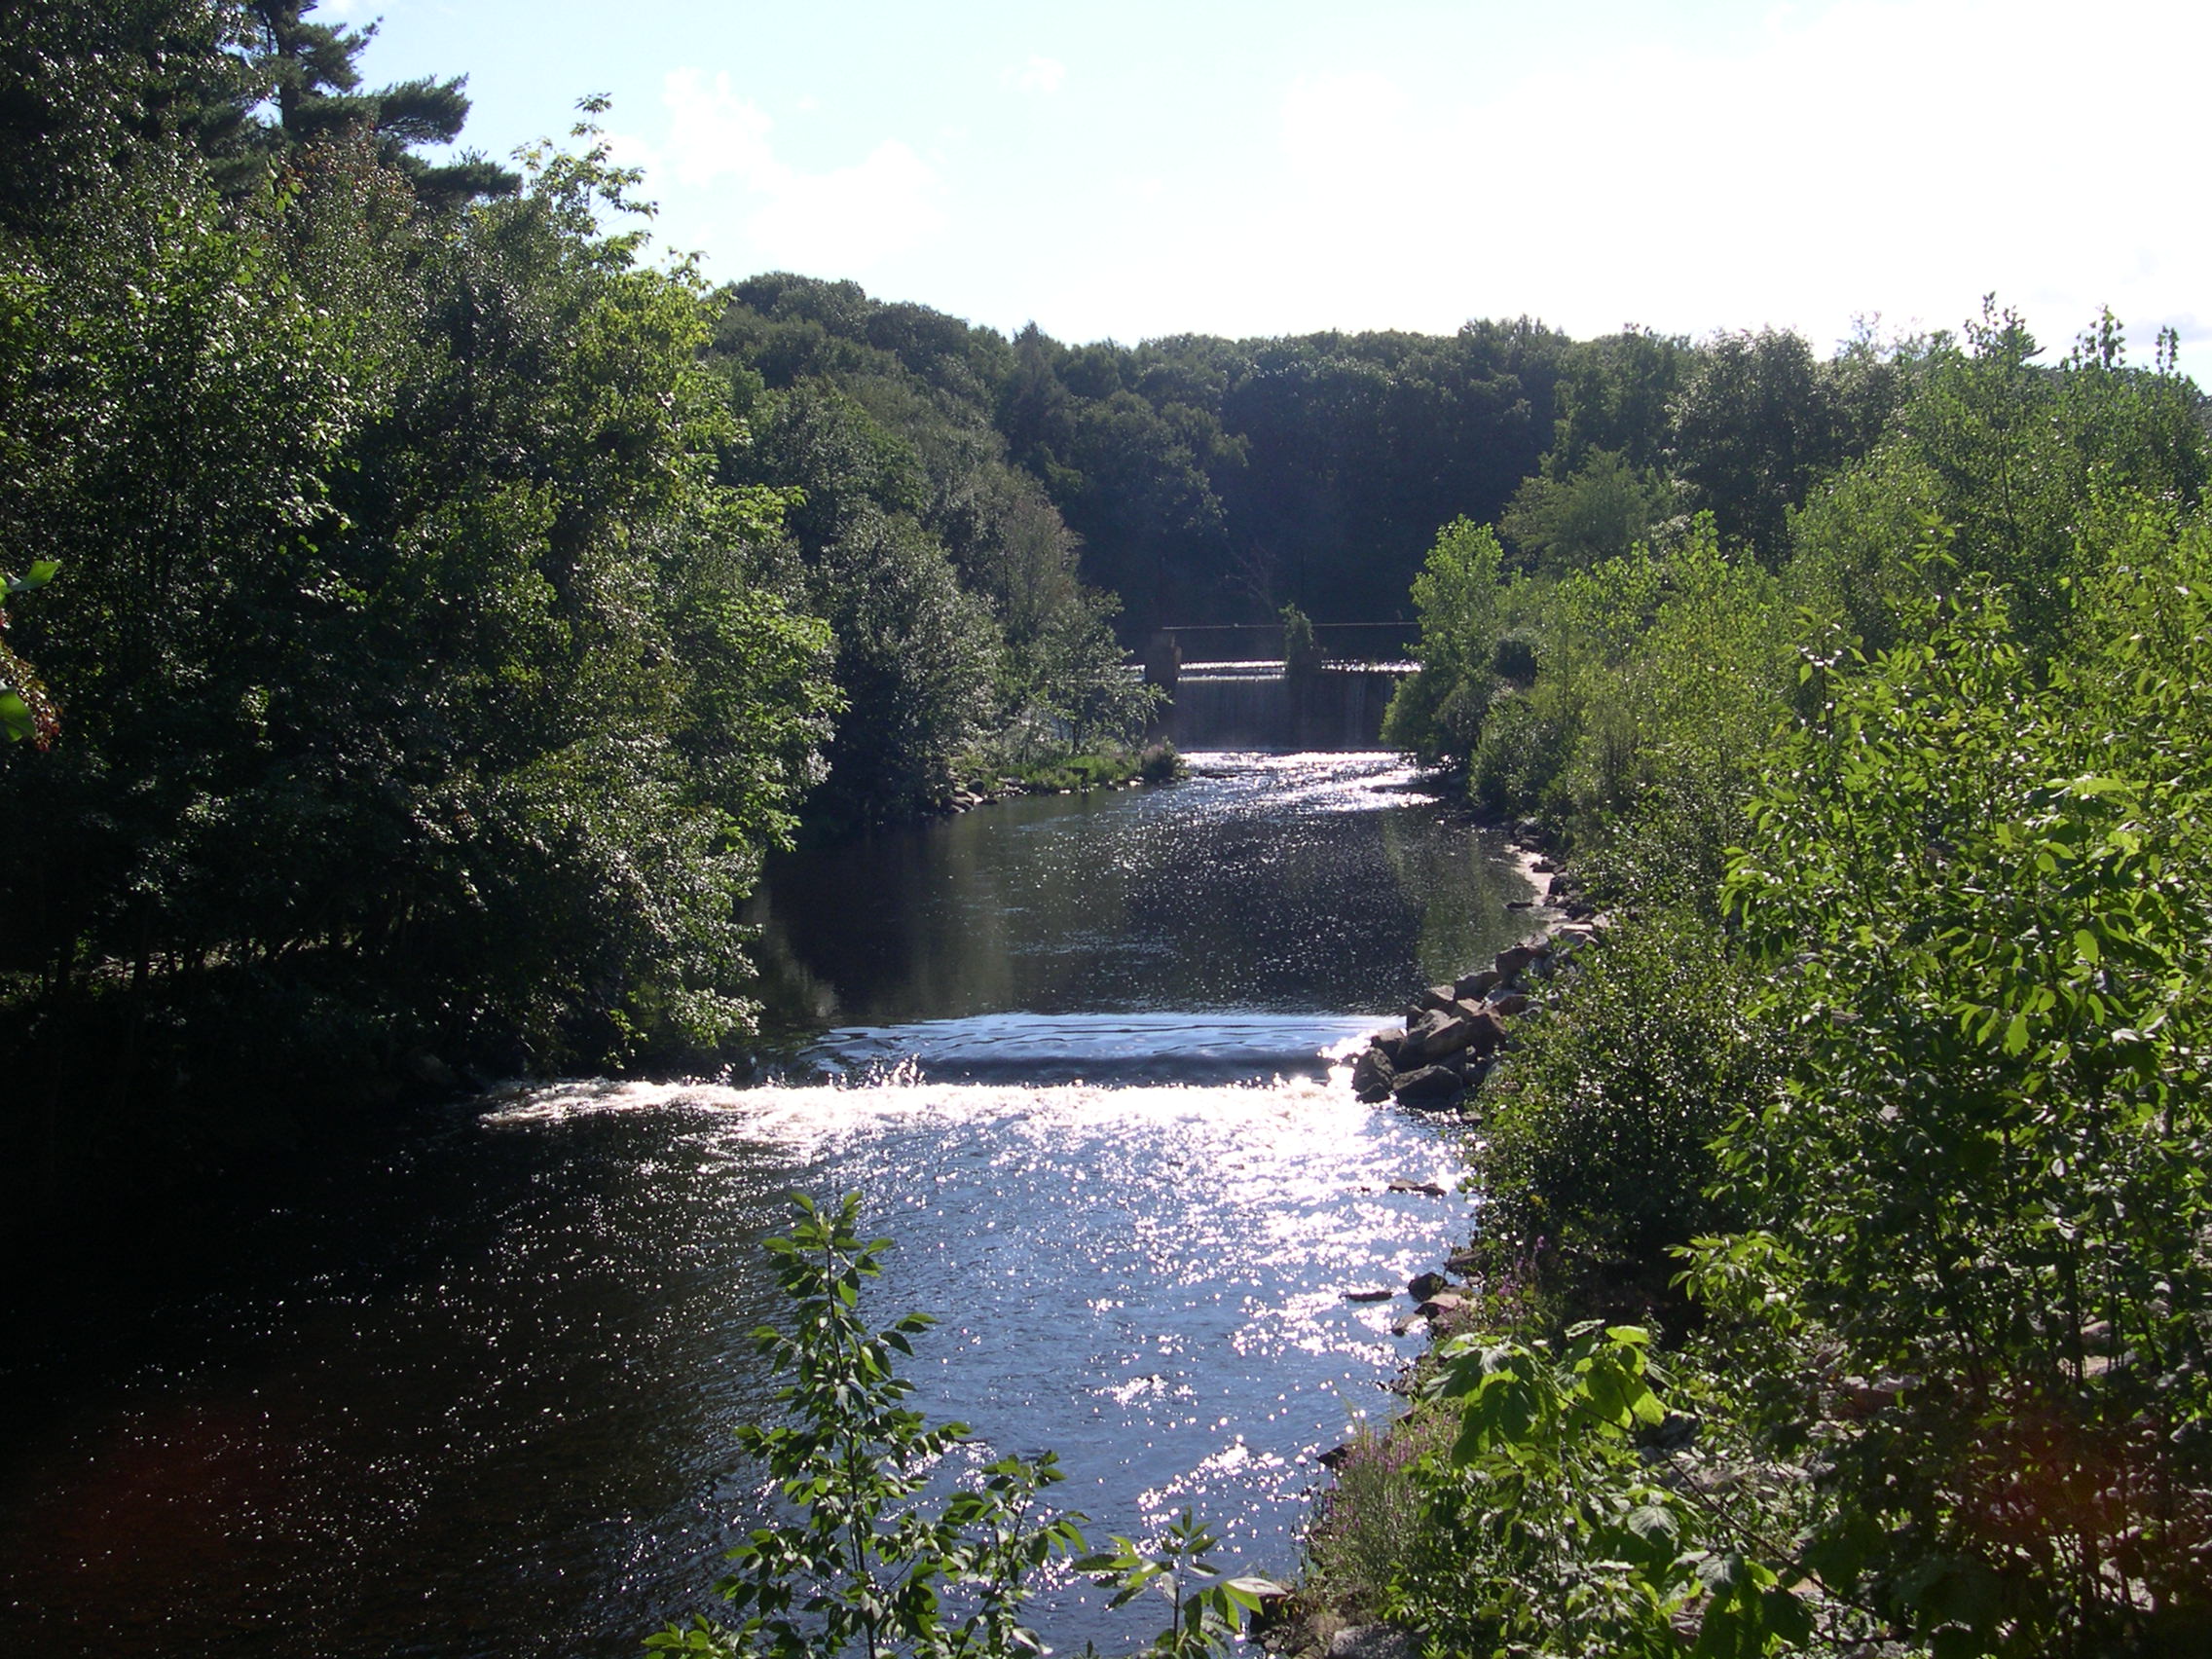 Photograph of the Branch River at Forestdale, RI, looking upstream